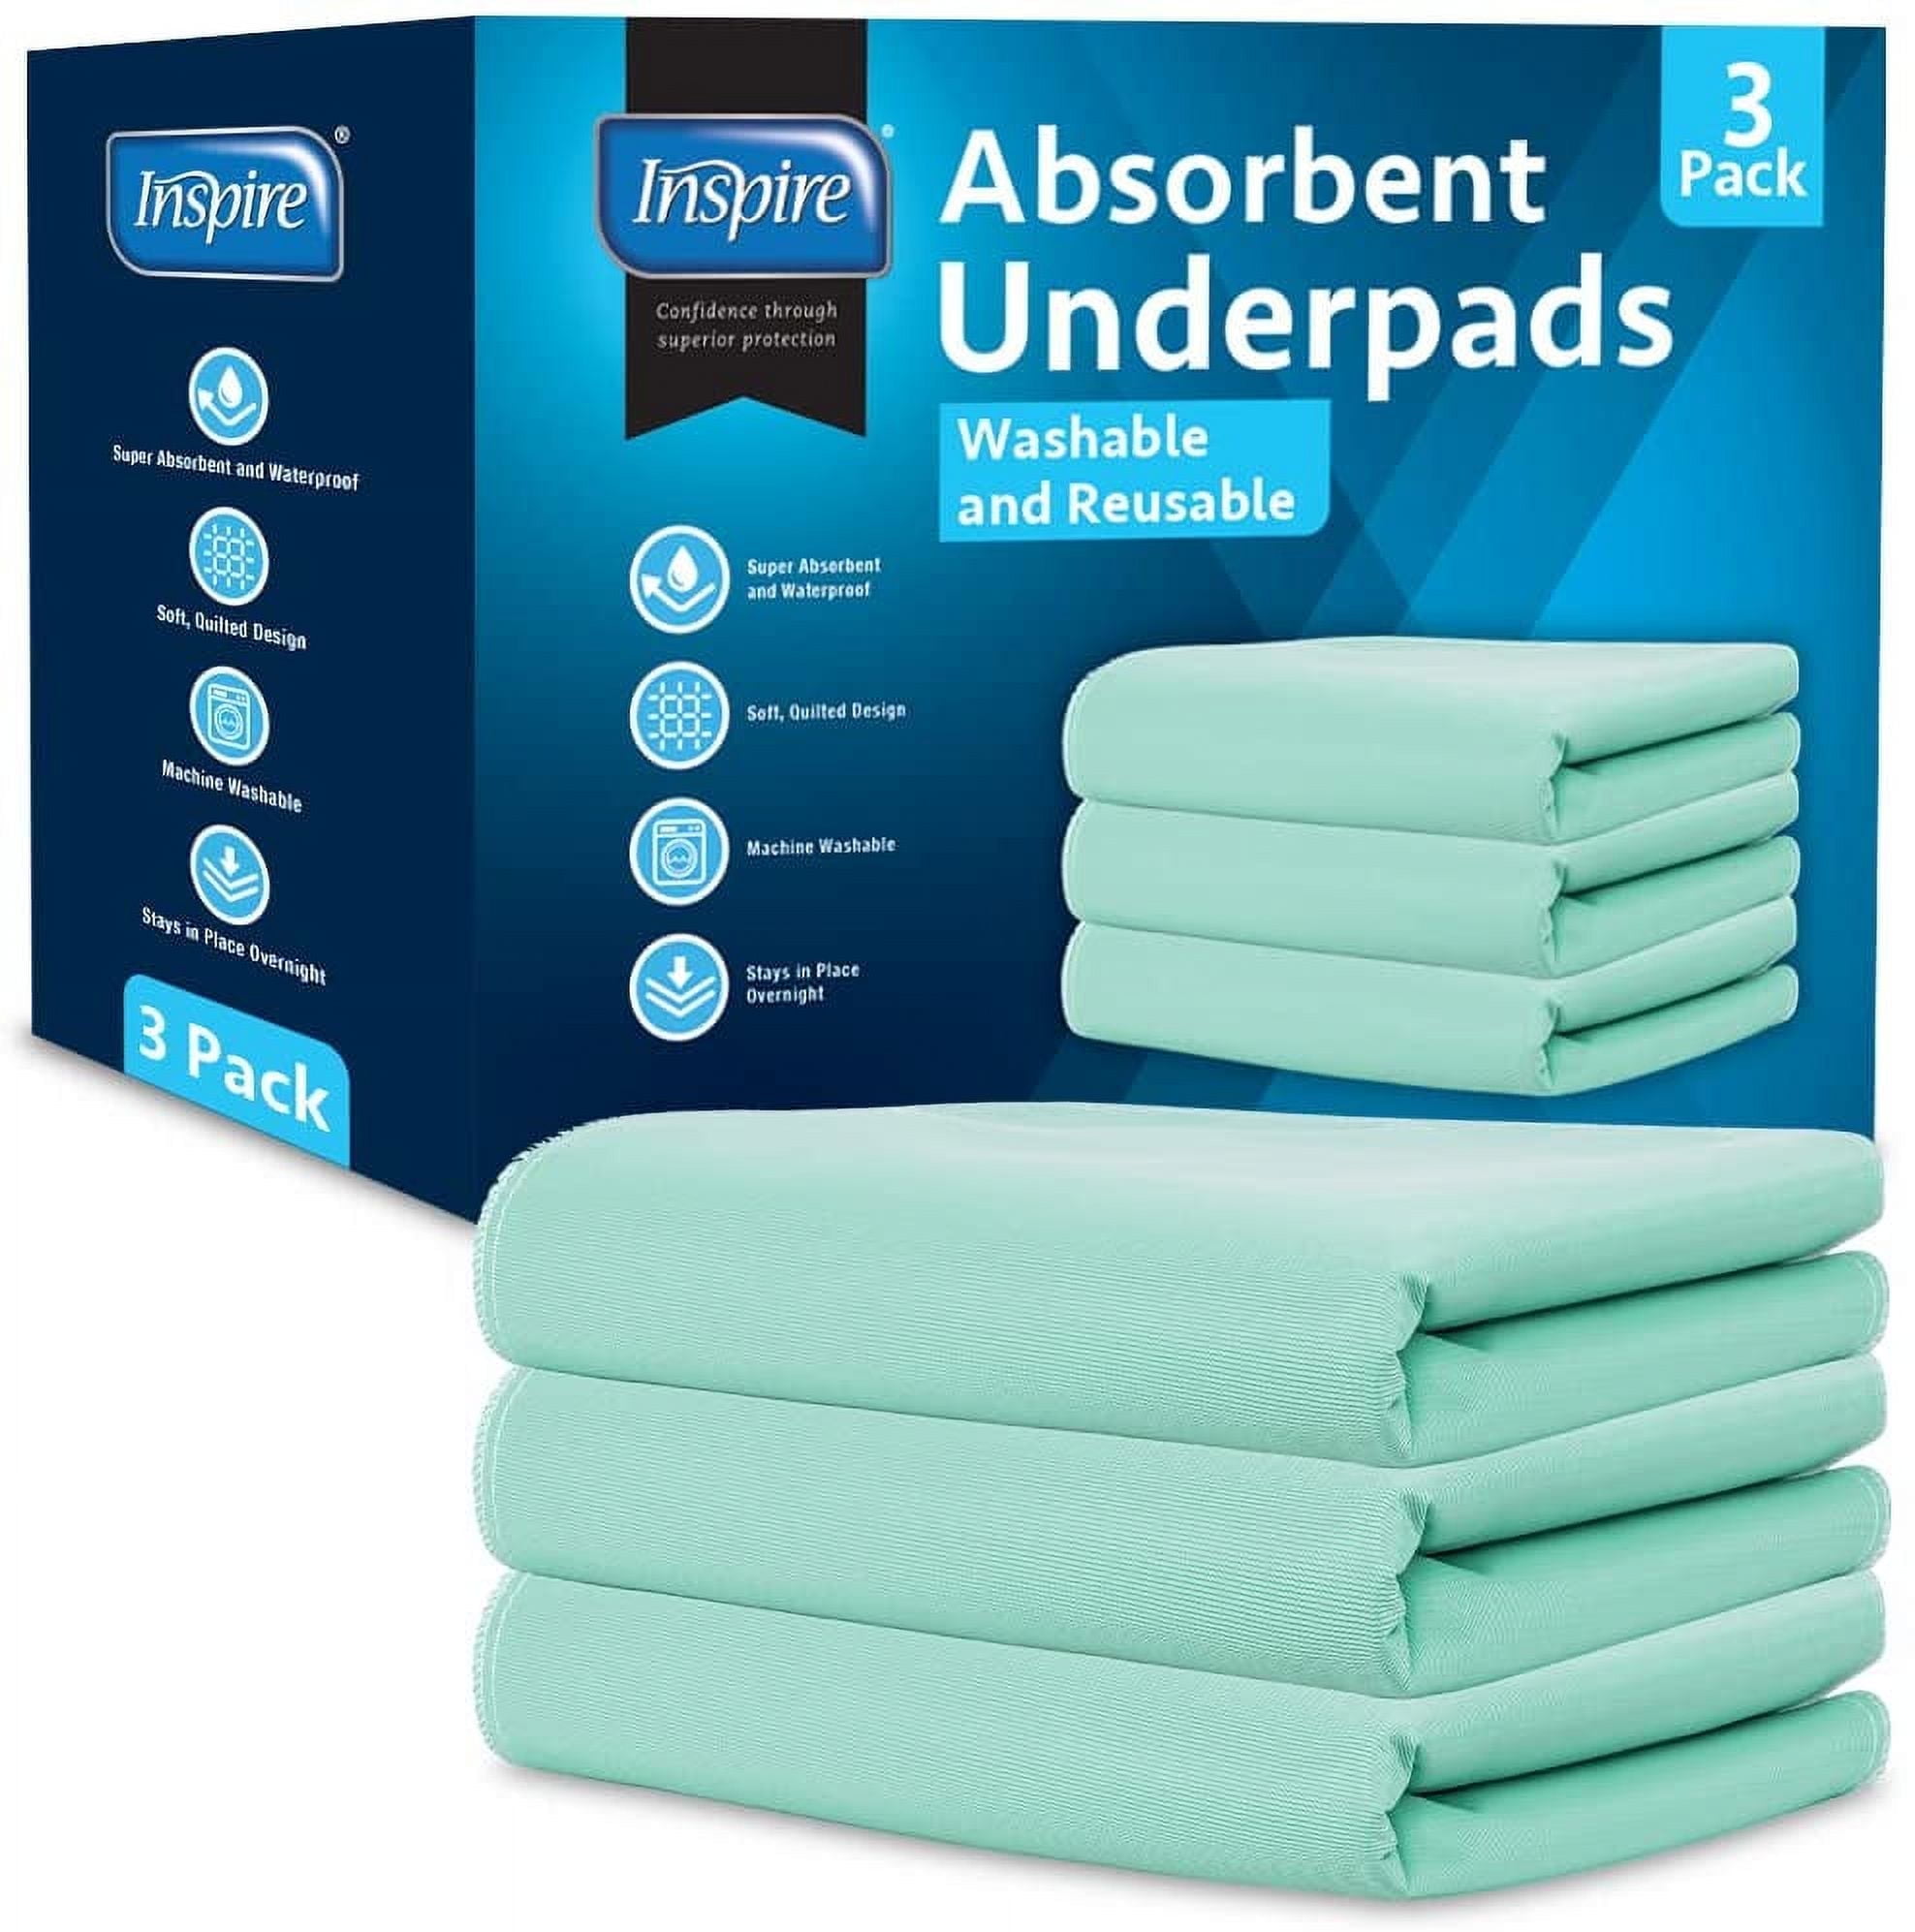 Inspire Washable and Reusable Incontinence Bed Pads 3 Pack Waterproof  Mattress Pad Chux Pads (18 x 24) 